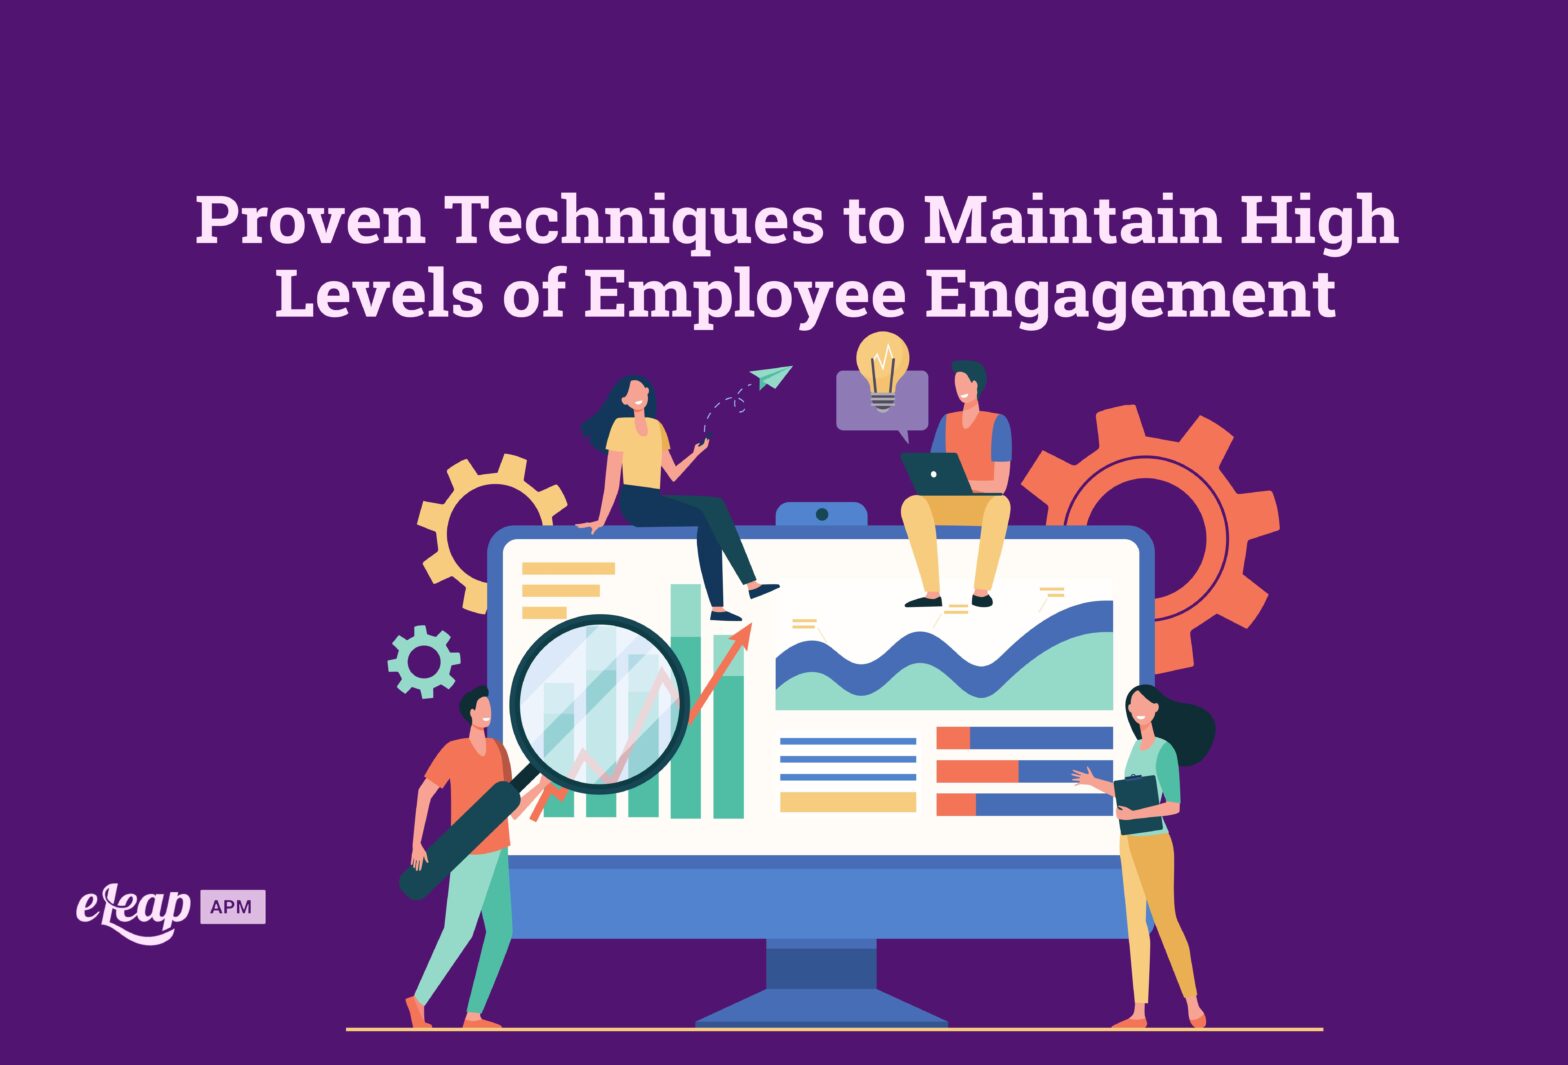 Proven Techniques to Maintain High Levels of Employee Engagement